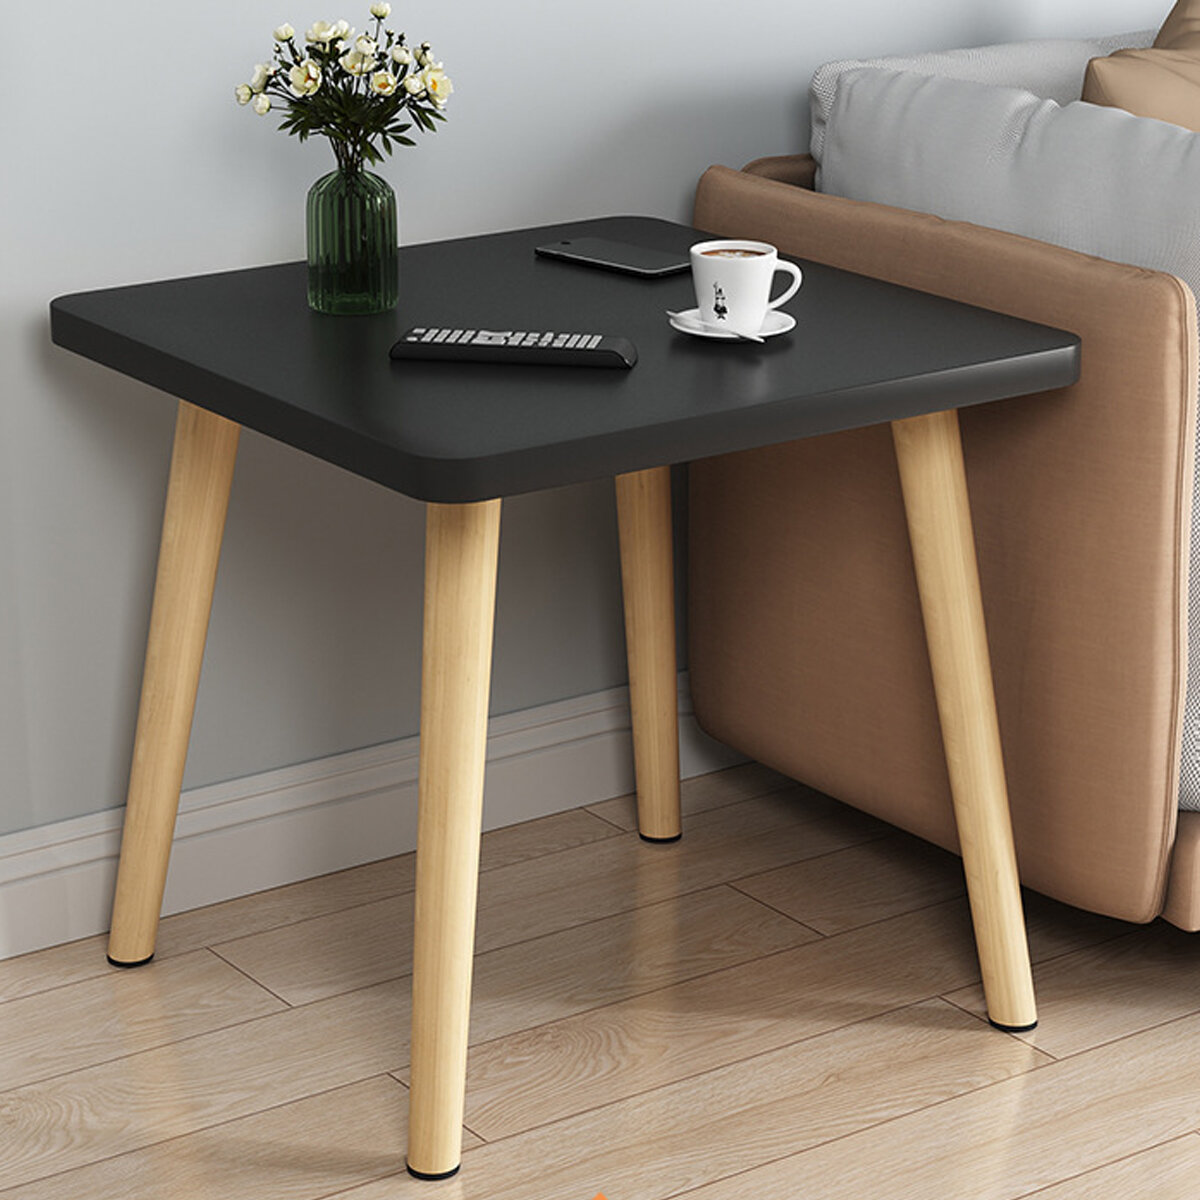 50/60cm Square Simple Coffee Table Storage Small Table Easy Installation, Large Loading Capacity